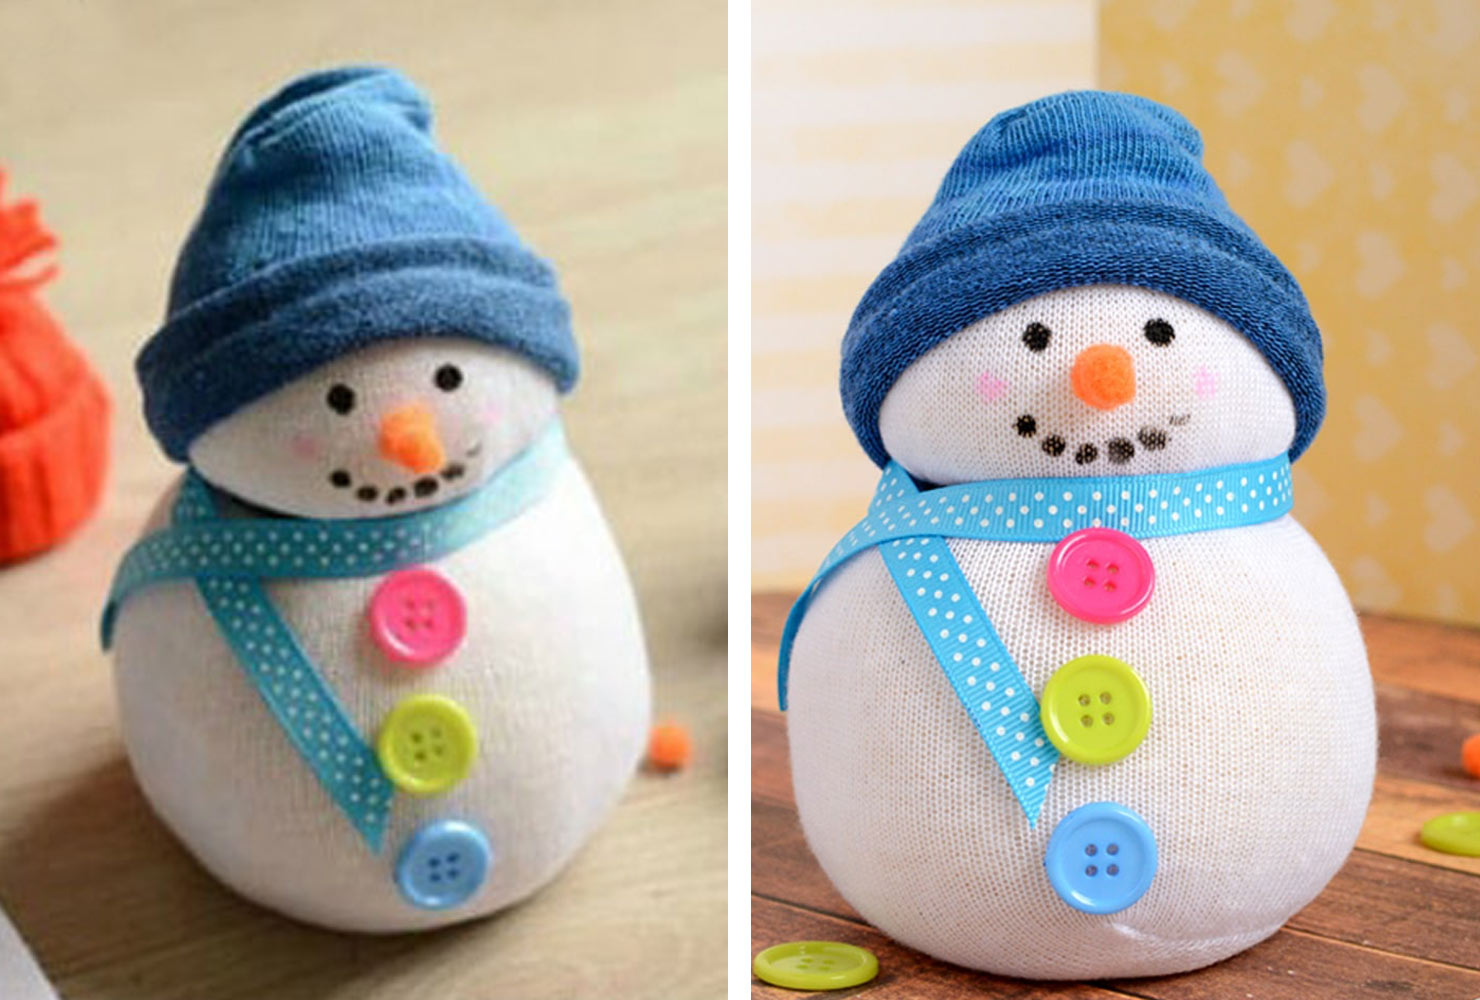  sock snowman with a sock beanie and buttons